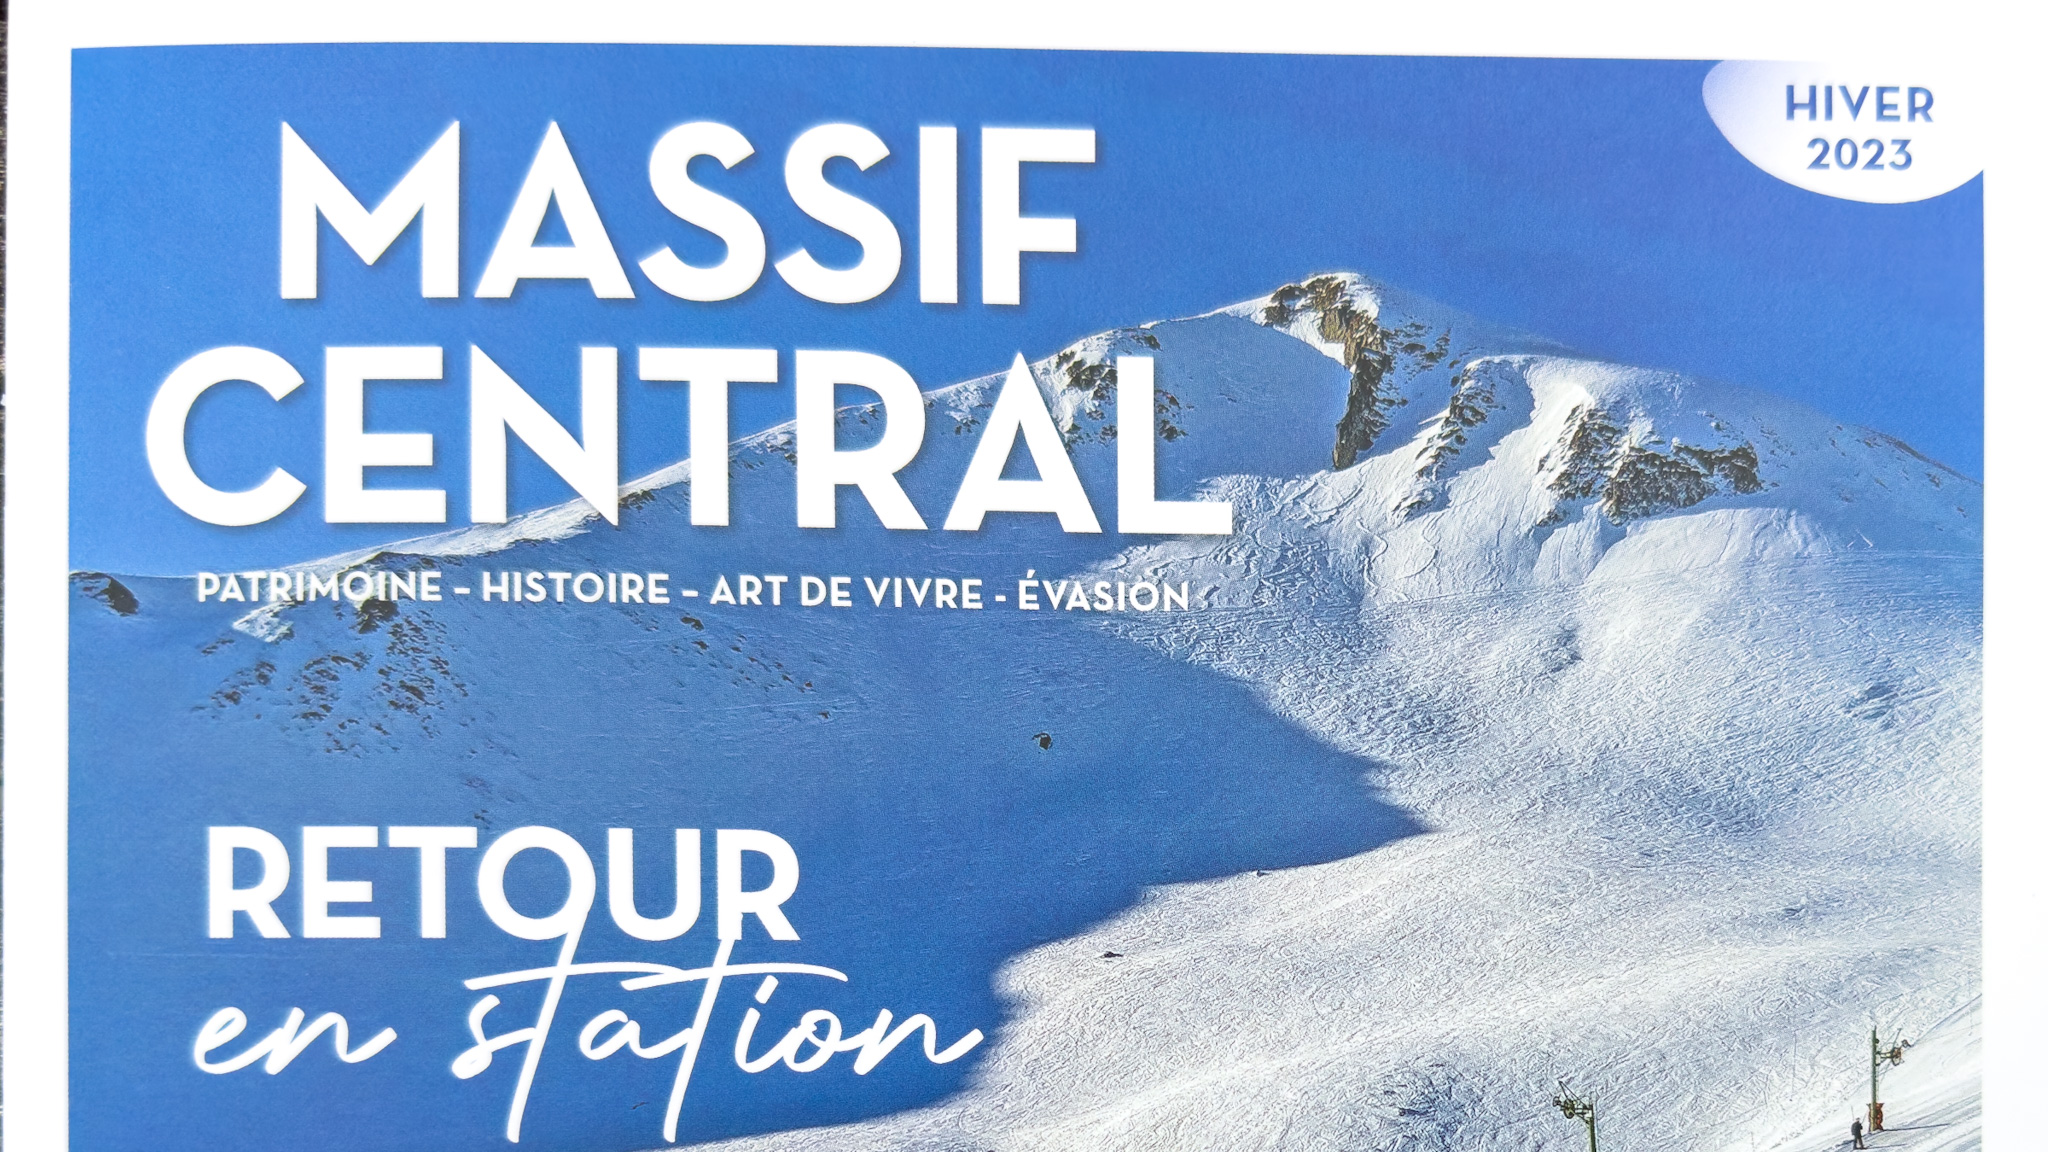 Massif Central magazine, article on the Anorak chalet, winter 2023 issue